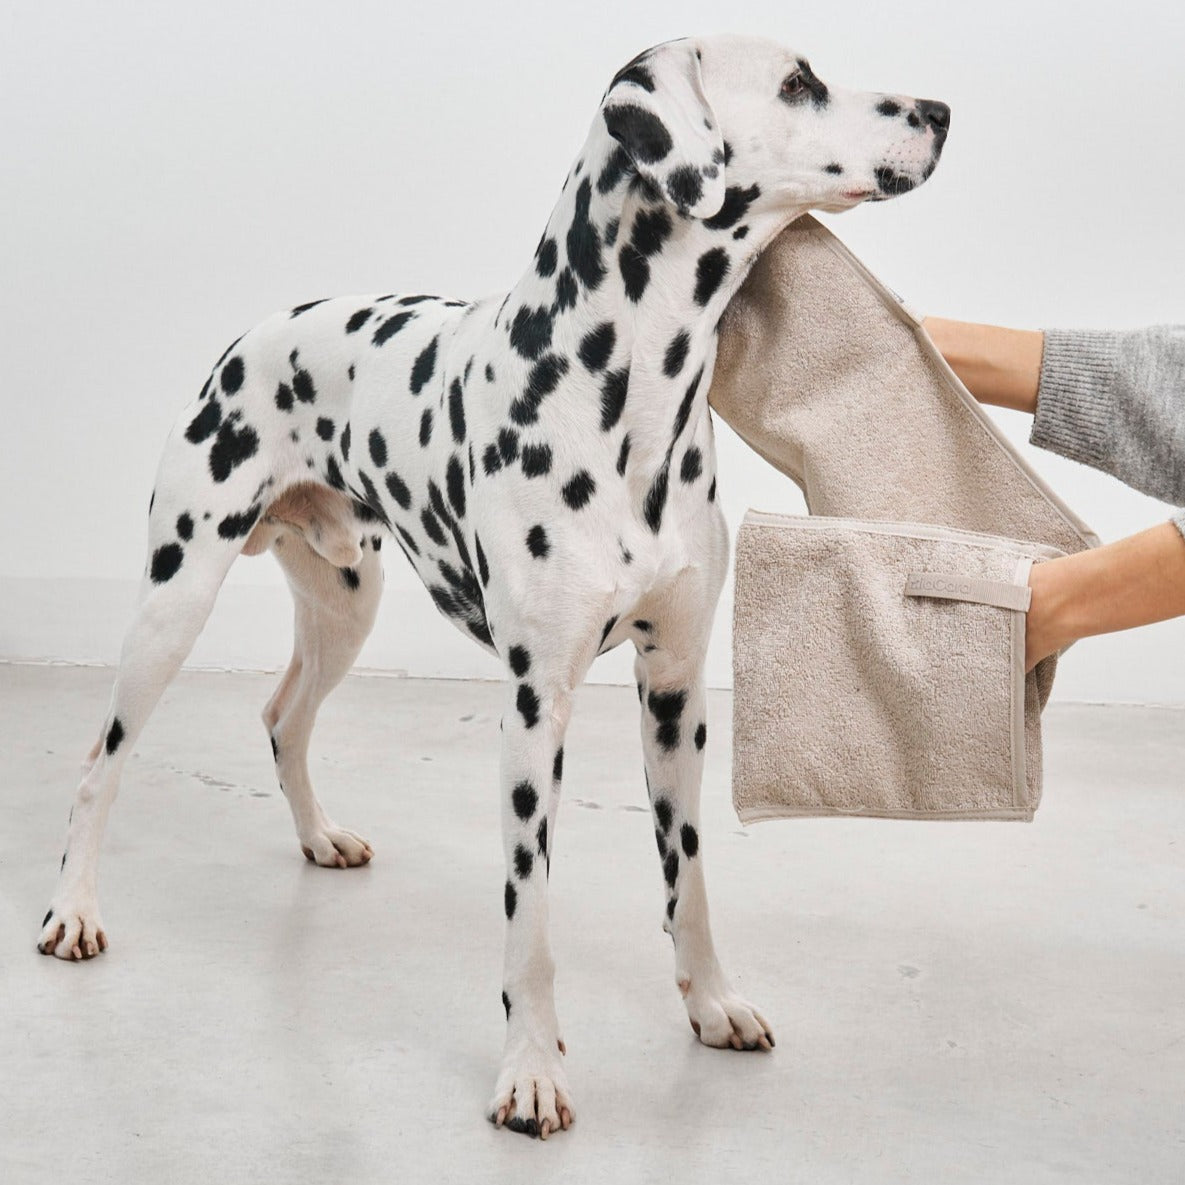 Absorbent dog towel for post-bath or rainy days